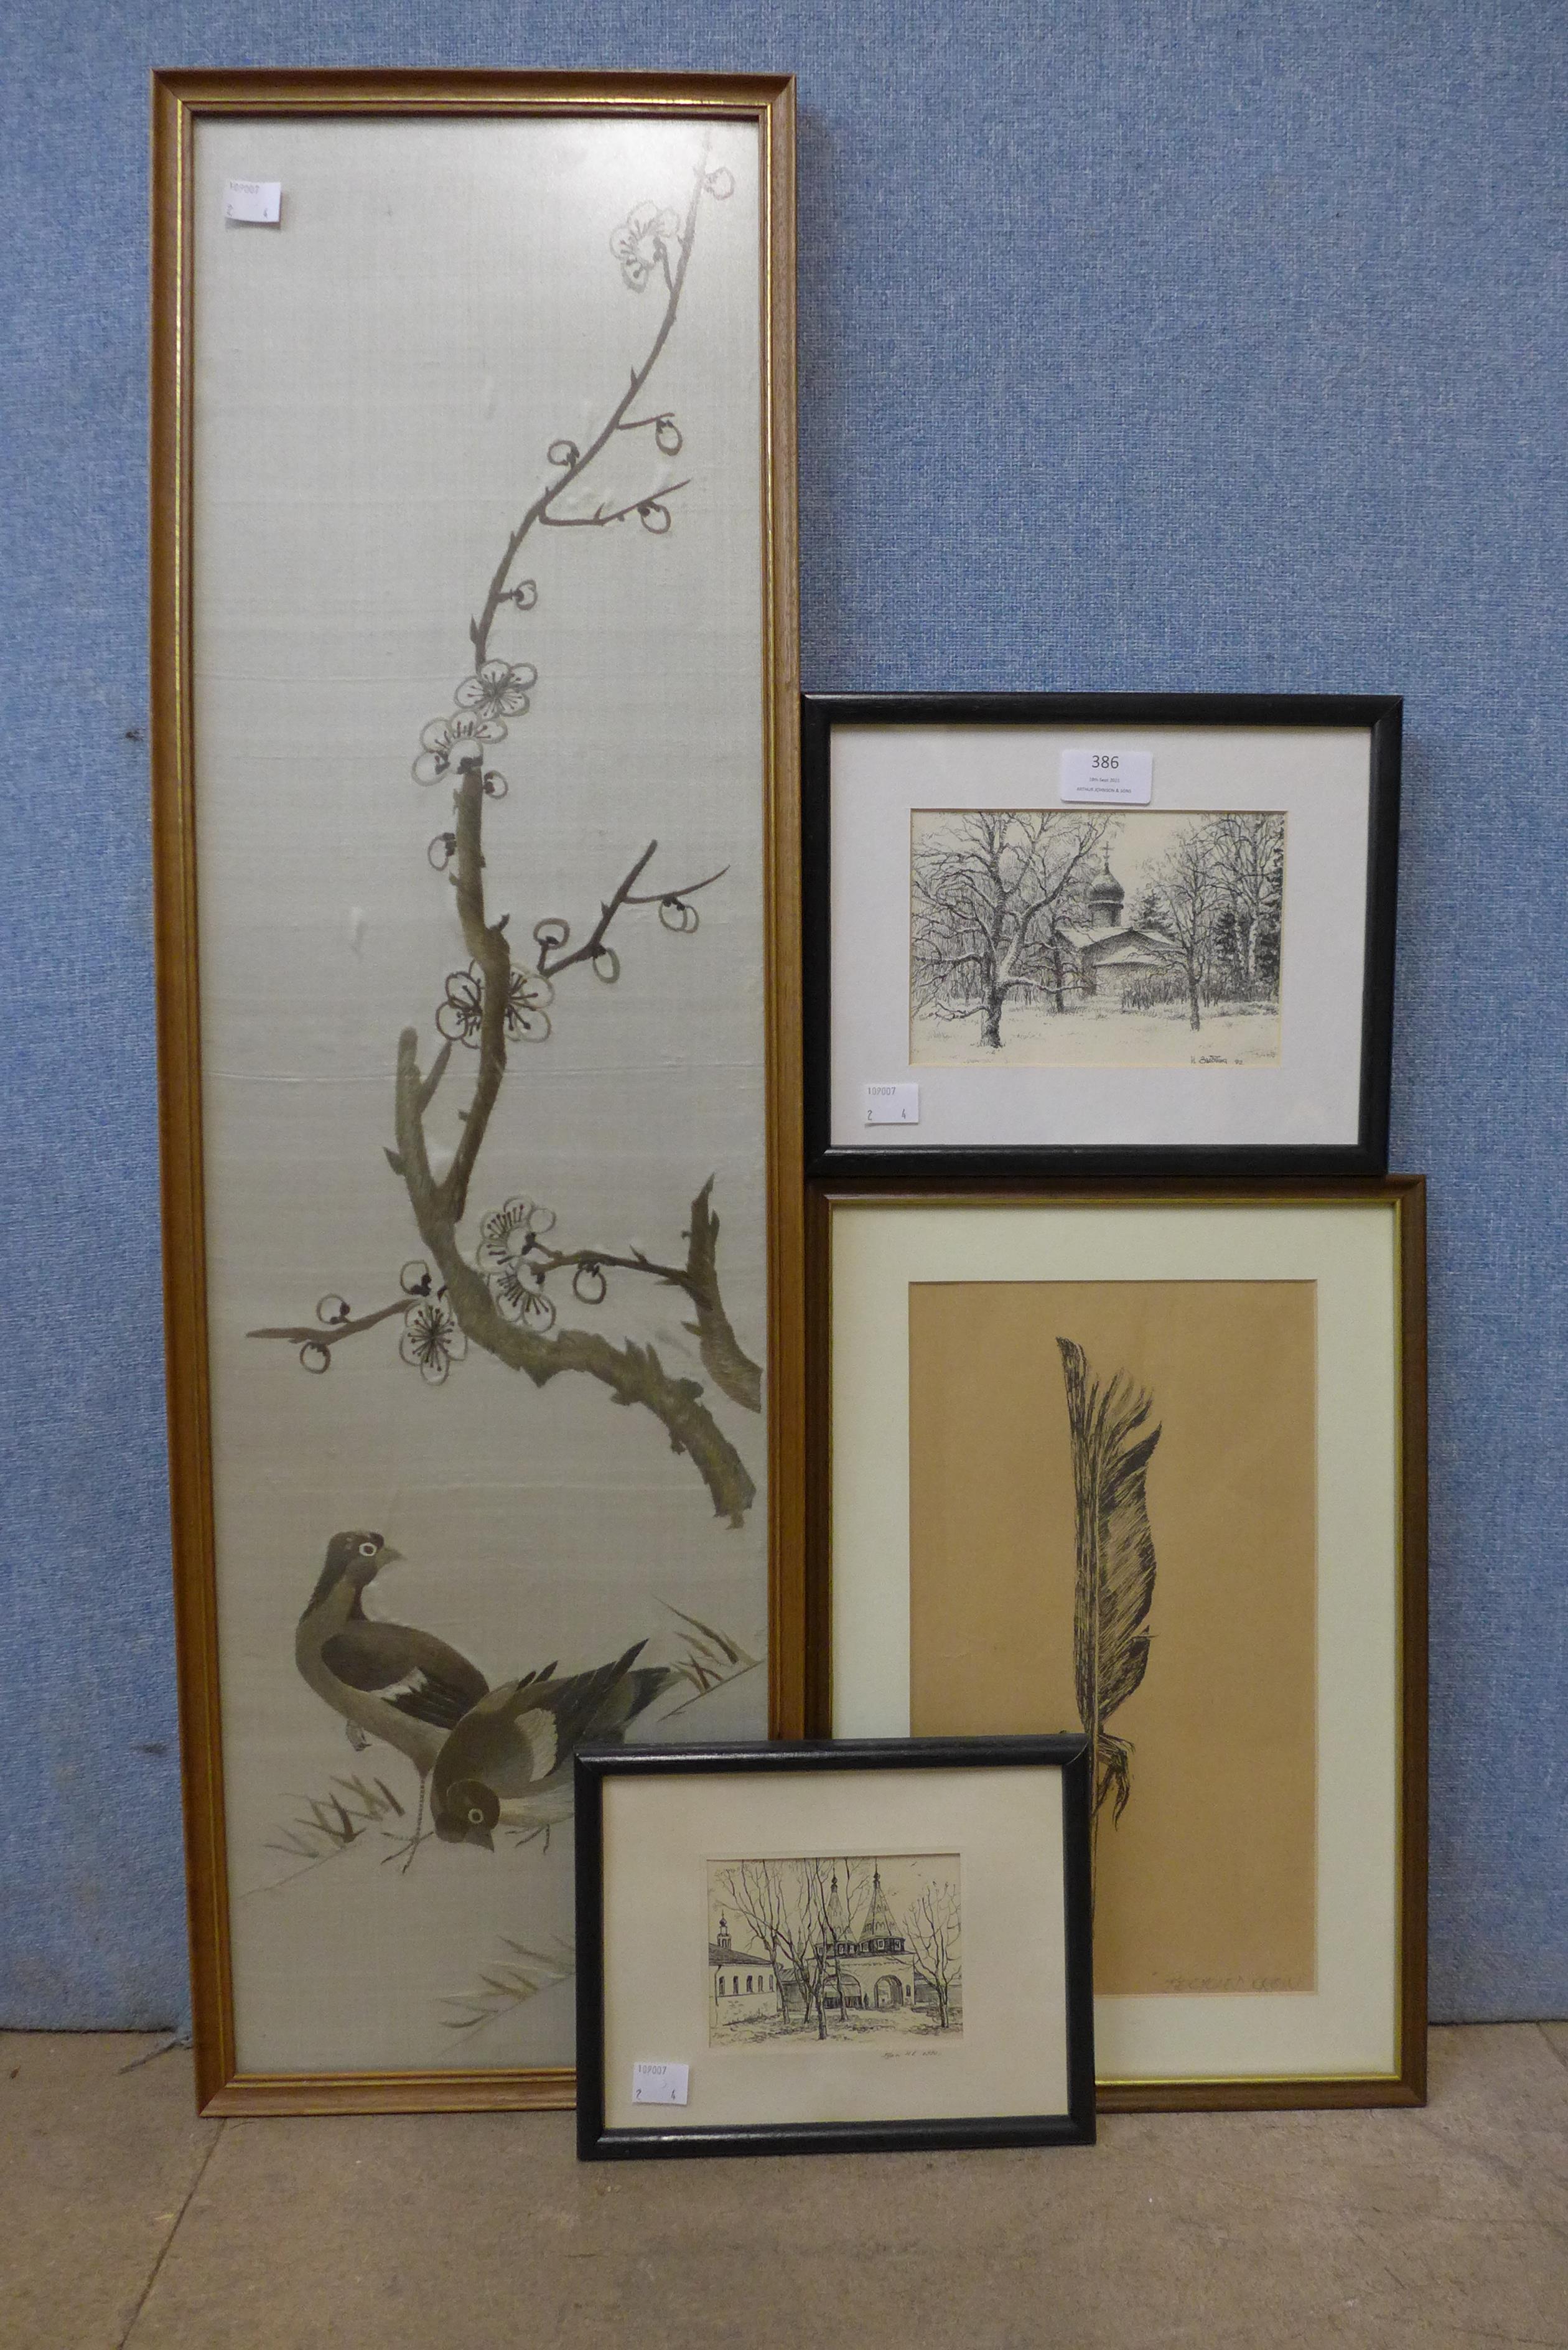 John Wilson, Recycled Crow, framed, two Russian School landscapes and an embroidery